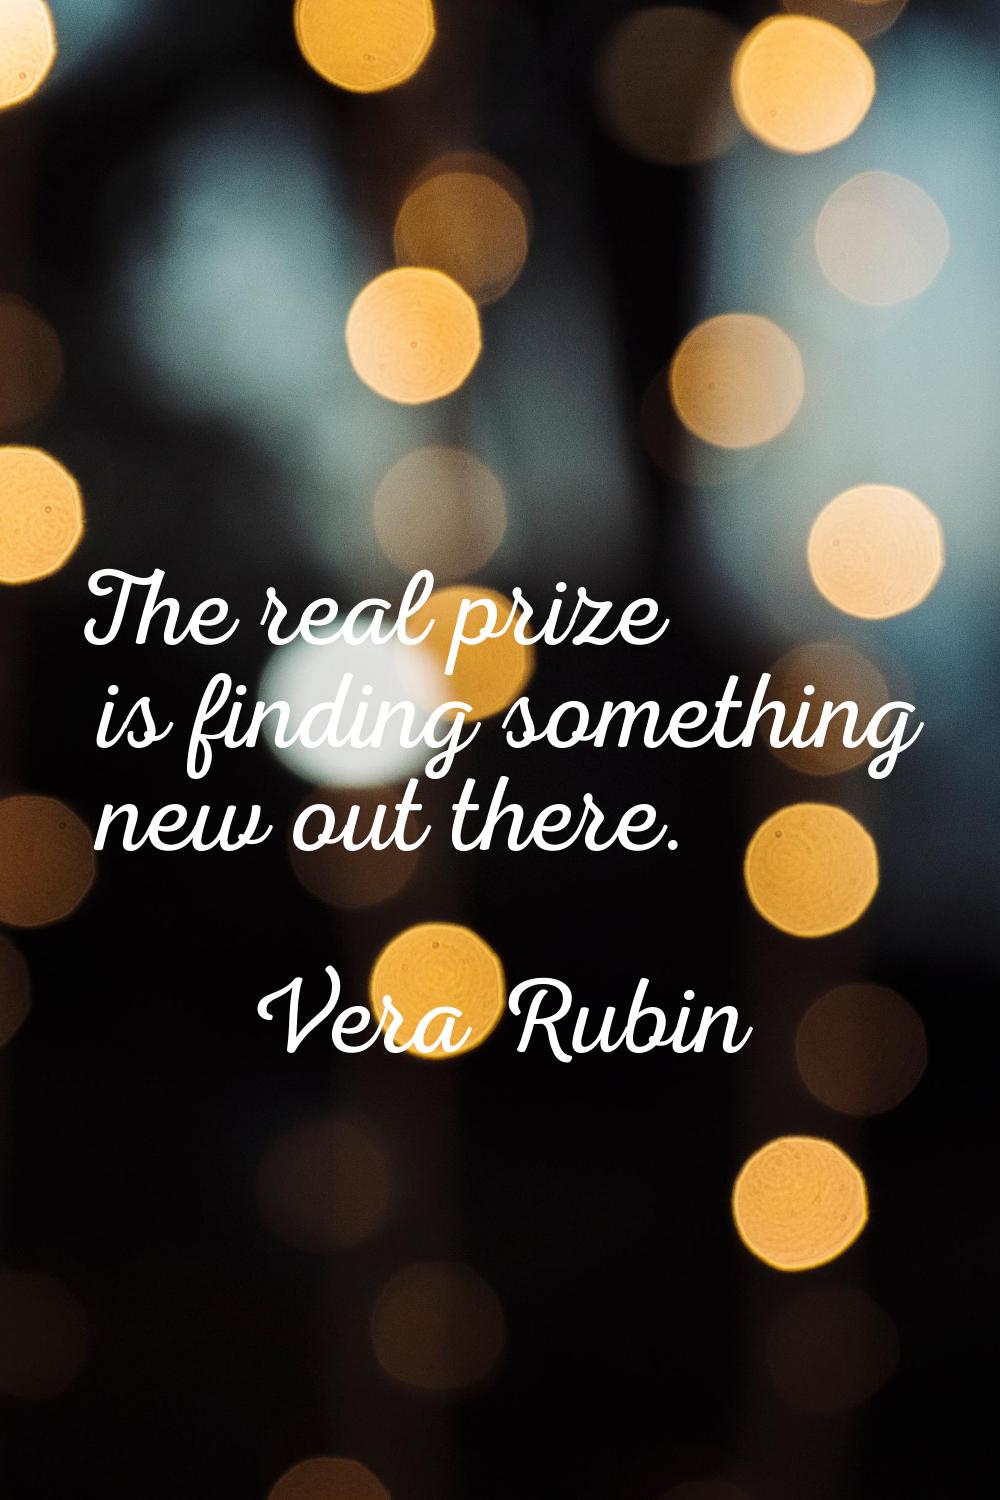 The real prize is finding something new out there.